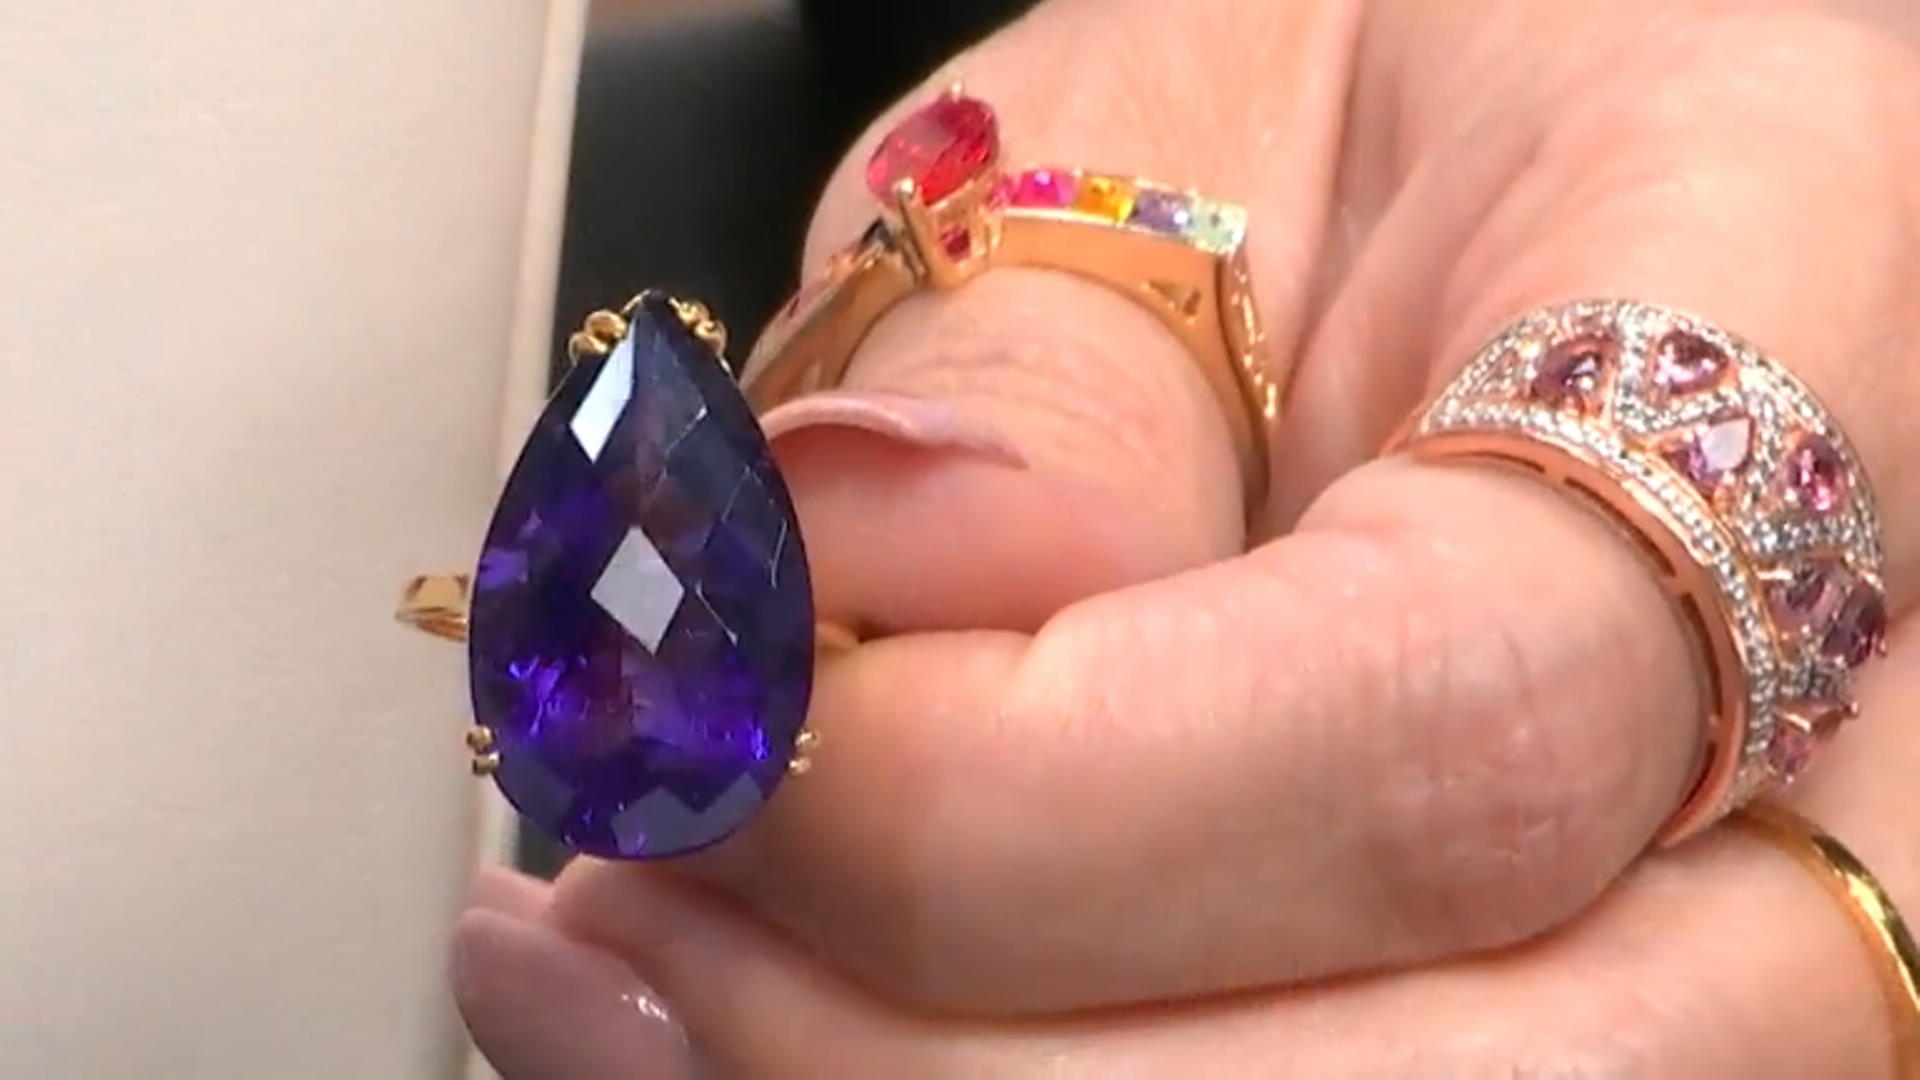 Purple African Amethyst 18k Yellow Gold Over Sterling Silver Ring 17.00ct Video Thumbnail